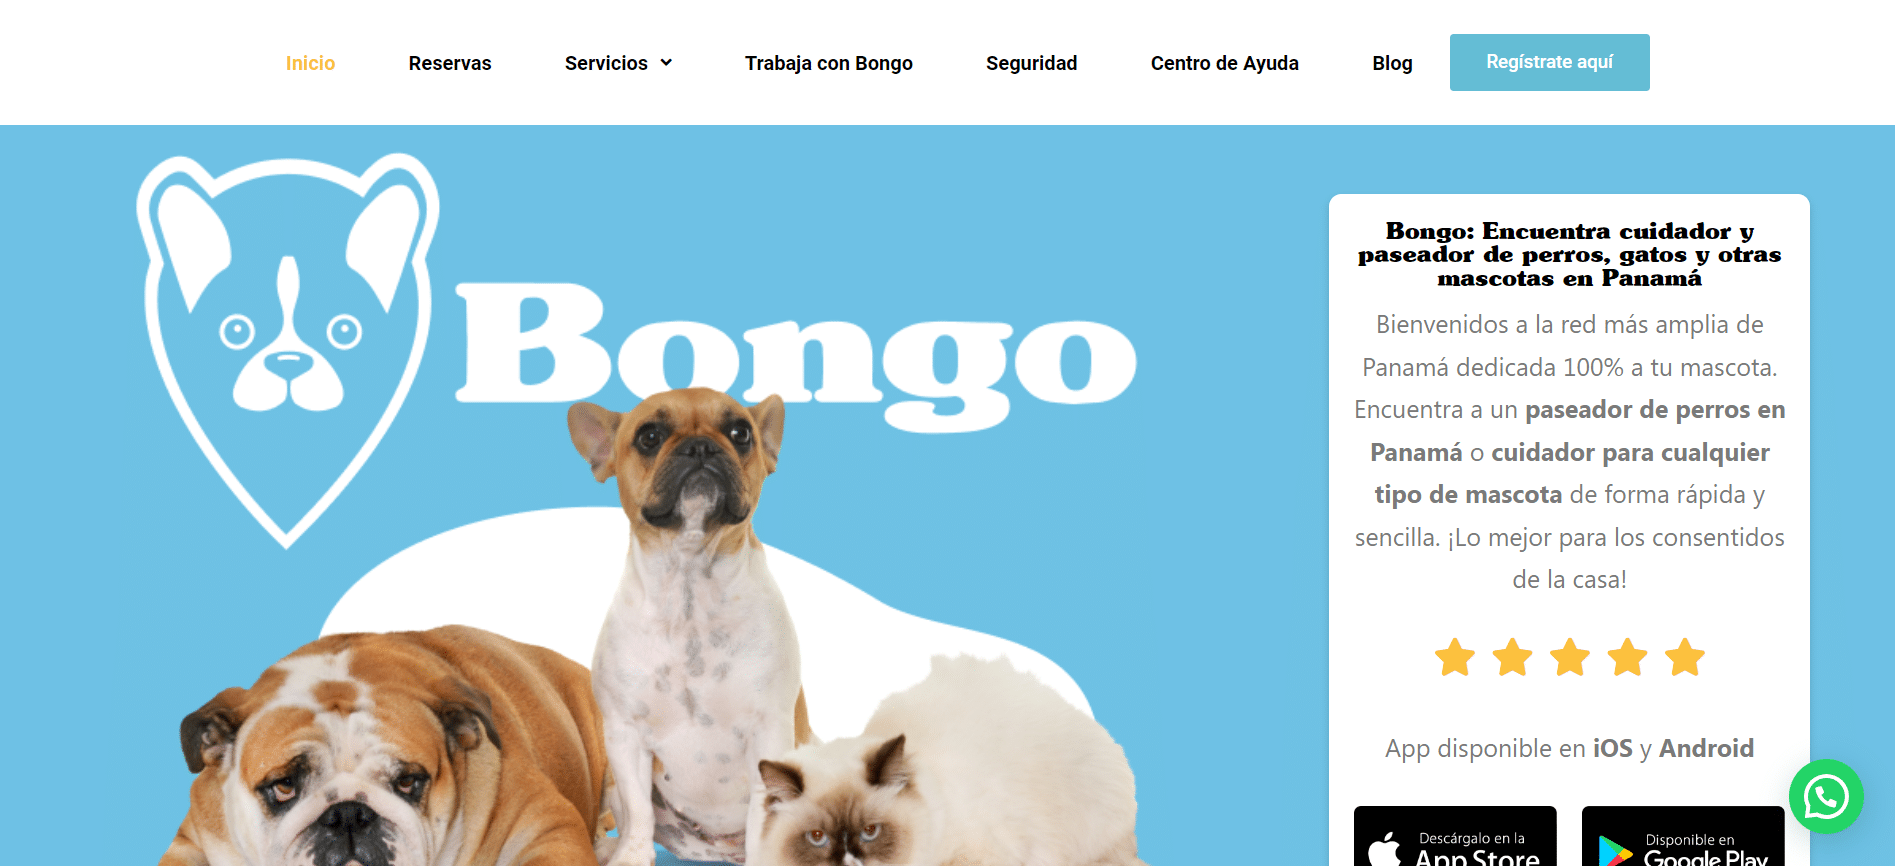 SEO Mastery: How Chili Grew 239% in Keyword Positioning on the Bongo Website?